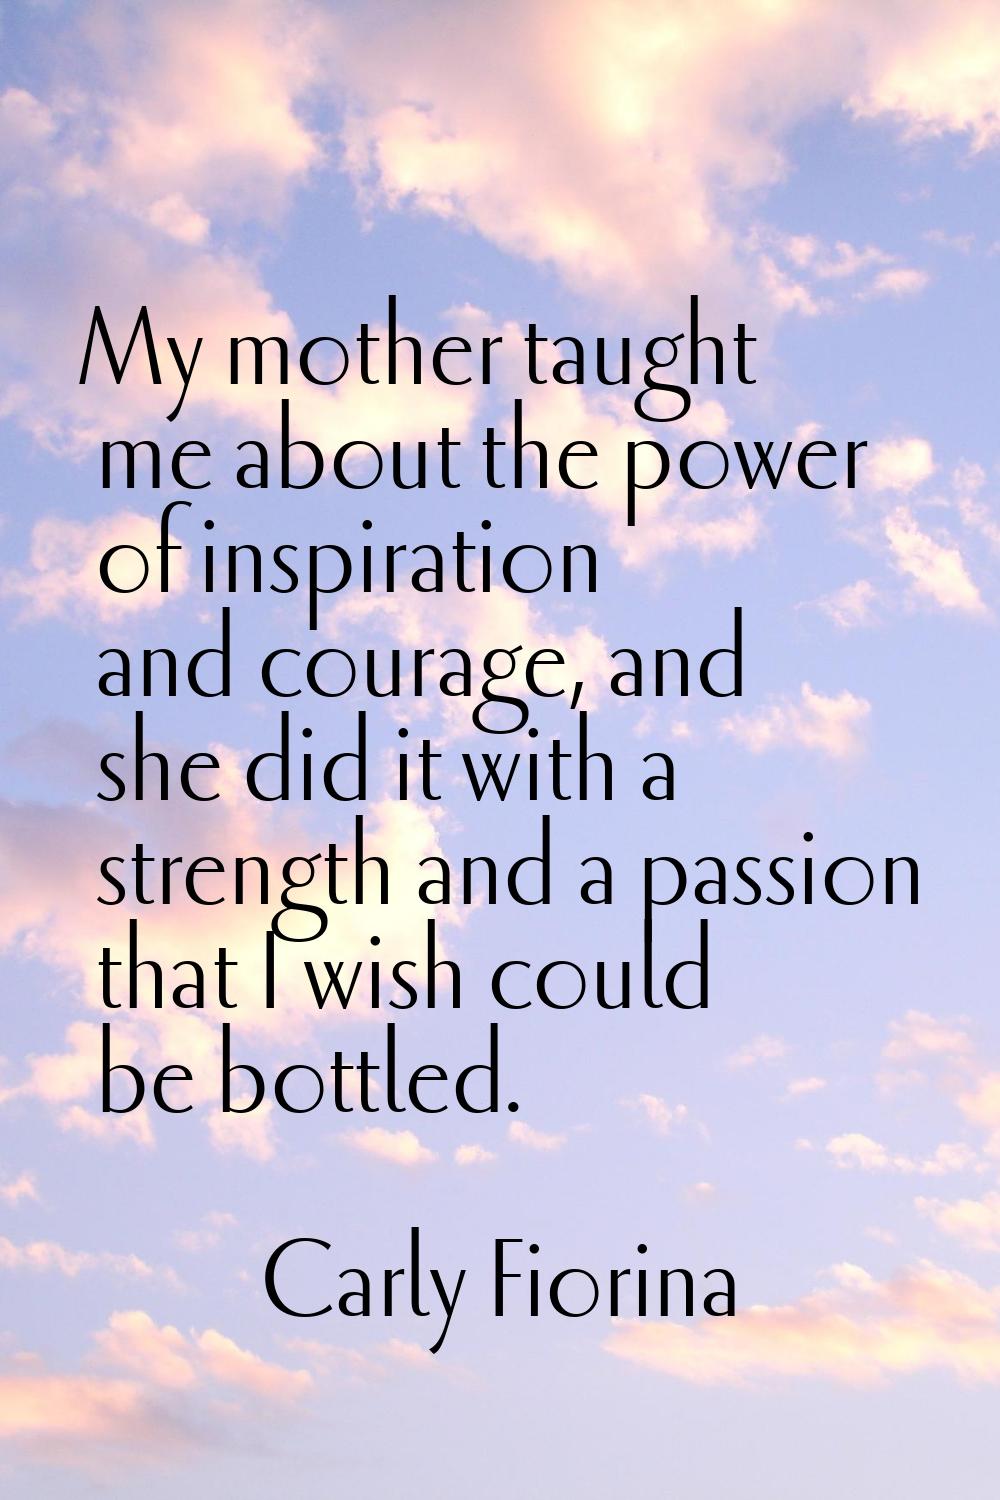 My mother taught me about the power of inspiration and courage, and she did it with a strength and 